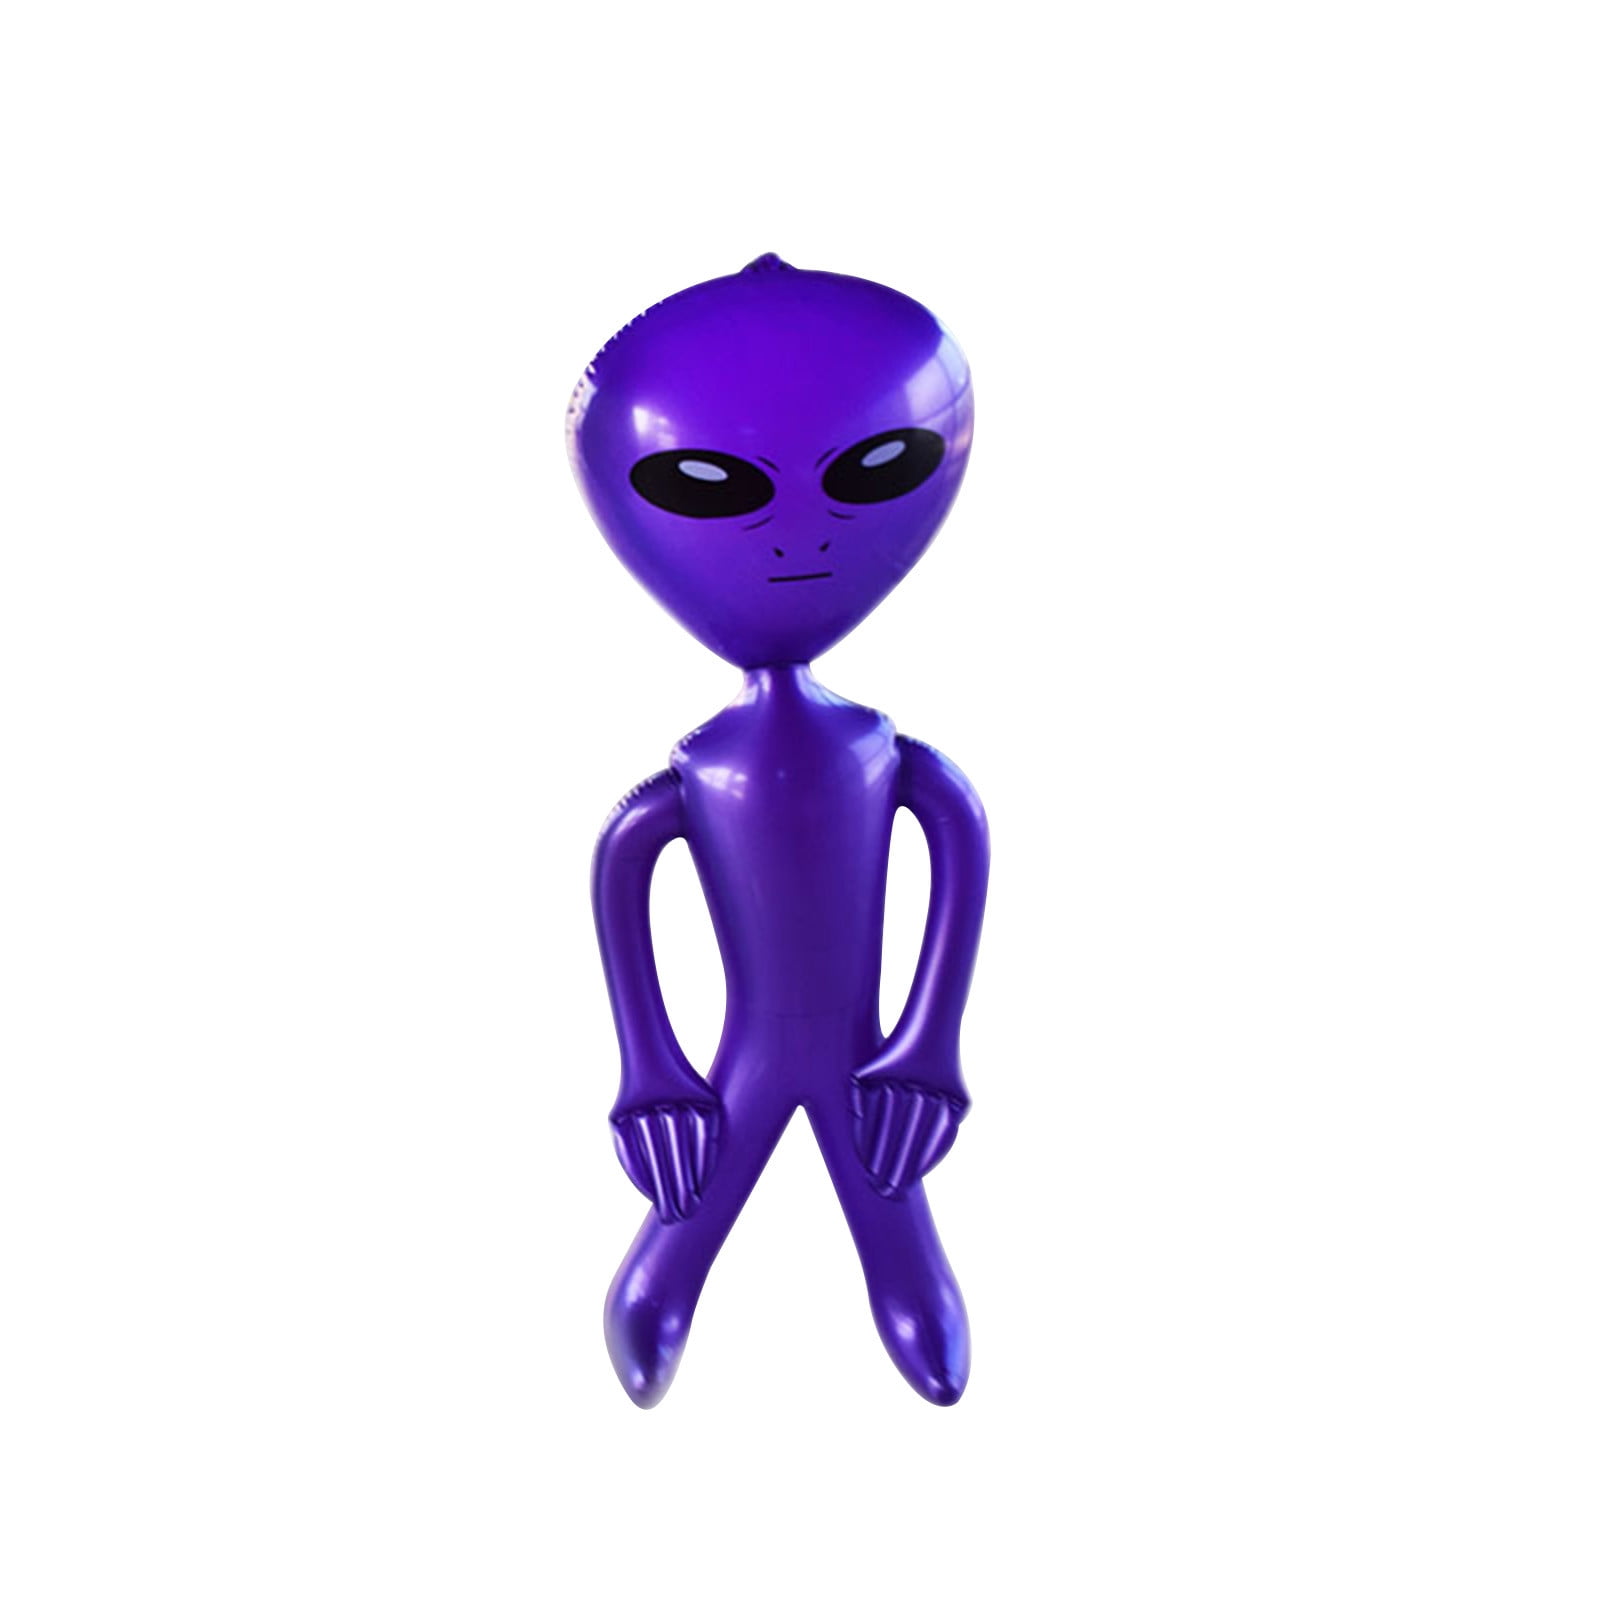 18 NEW INFLATABLE SPACE ALIENS GREEN PURPLE & BLUE 36"  INFLATE ALIEN HALLOWEEN 